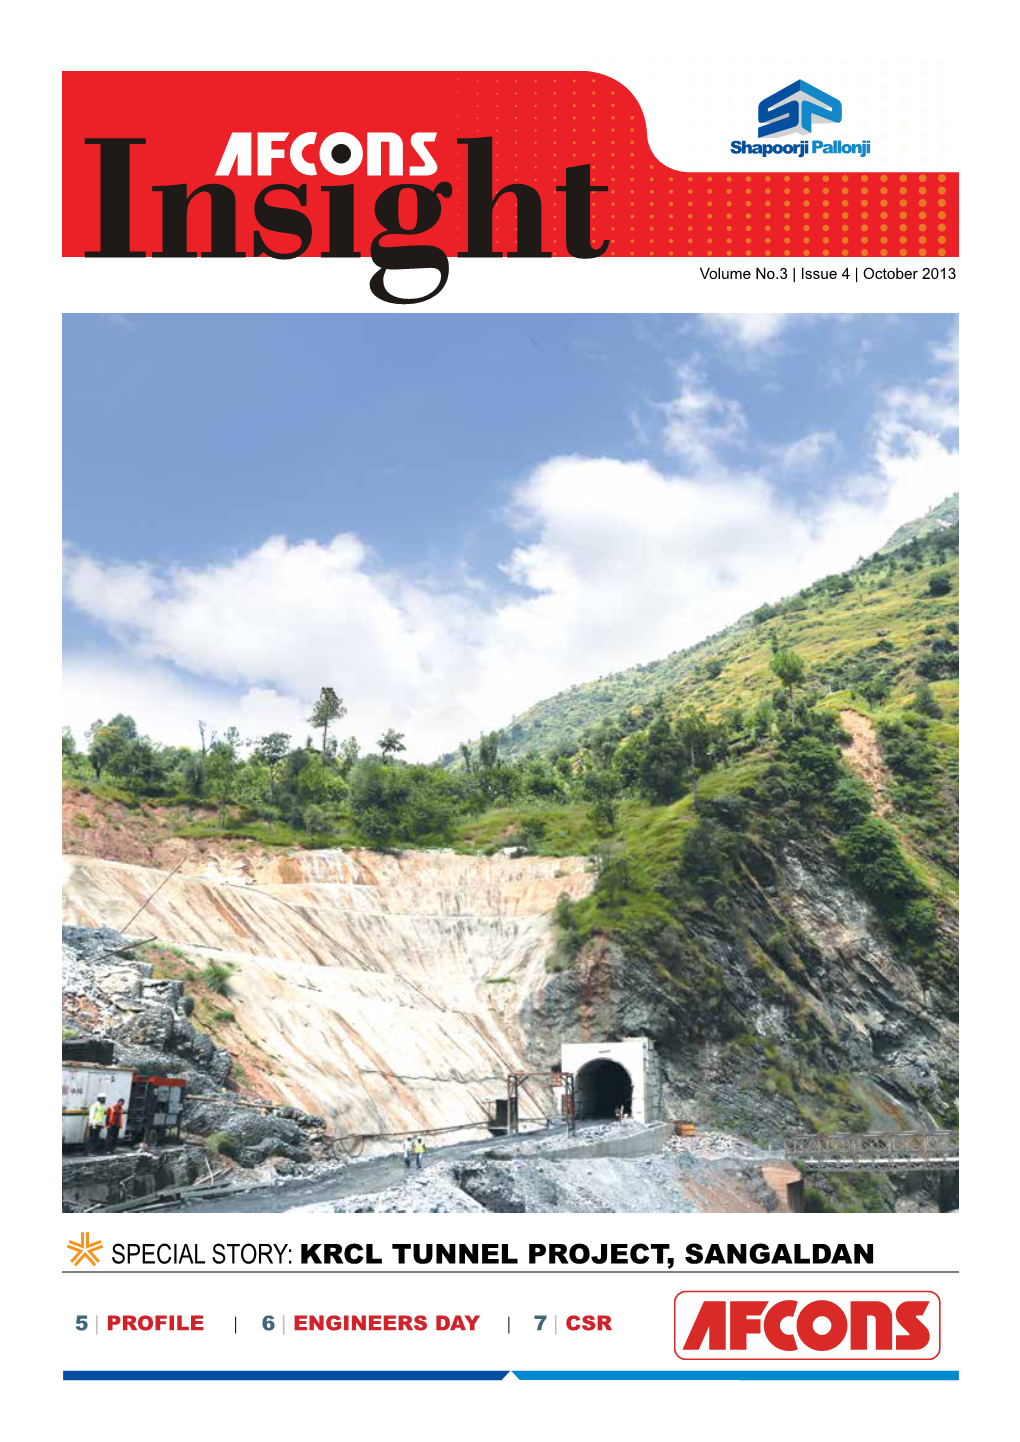 Special STORY: KRCL TUNNEL PROJECT, SANGALDAN